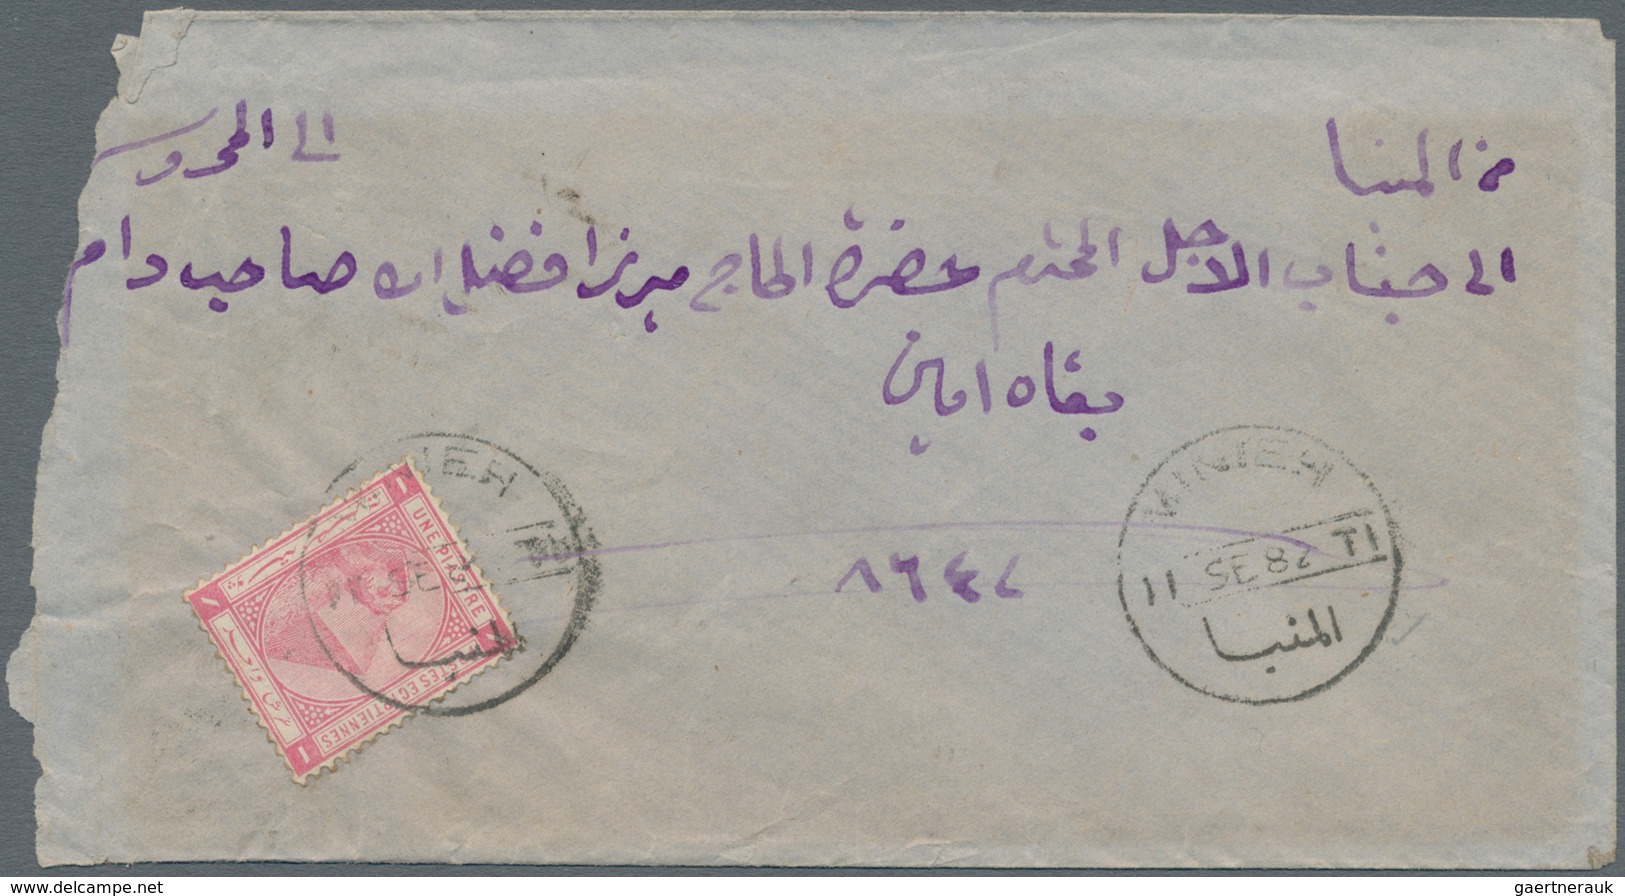 Ägypten: 1880/1888, Lot Of Eight Covers Franked With Pyramid/Sphinx Issues, Some Postal Wear/roughly - 1866-1914 Khedivate Of Egypt